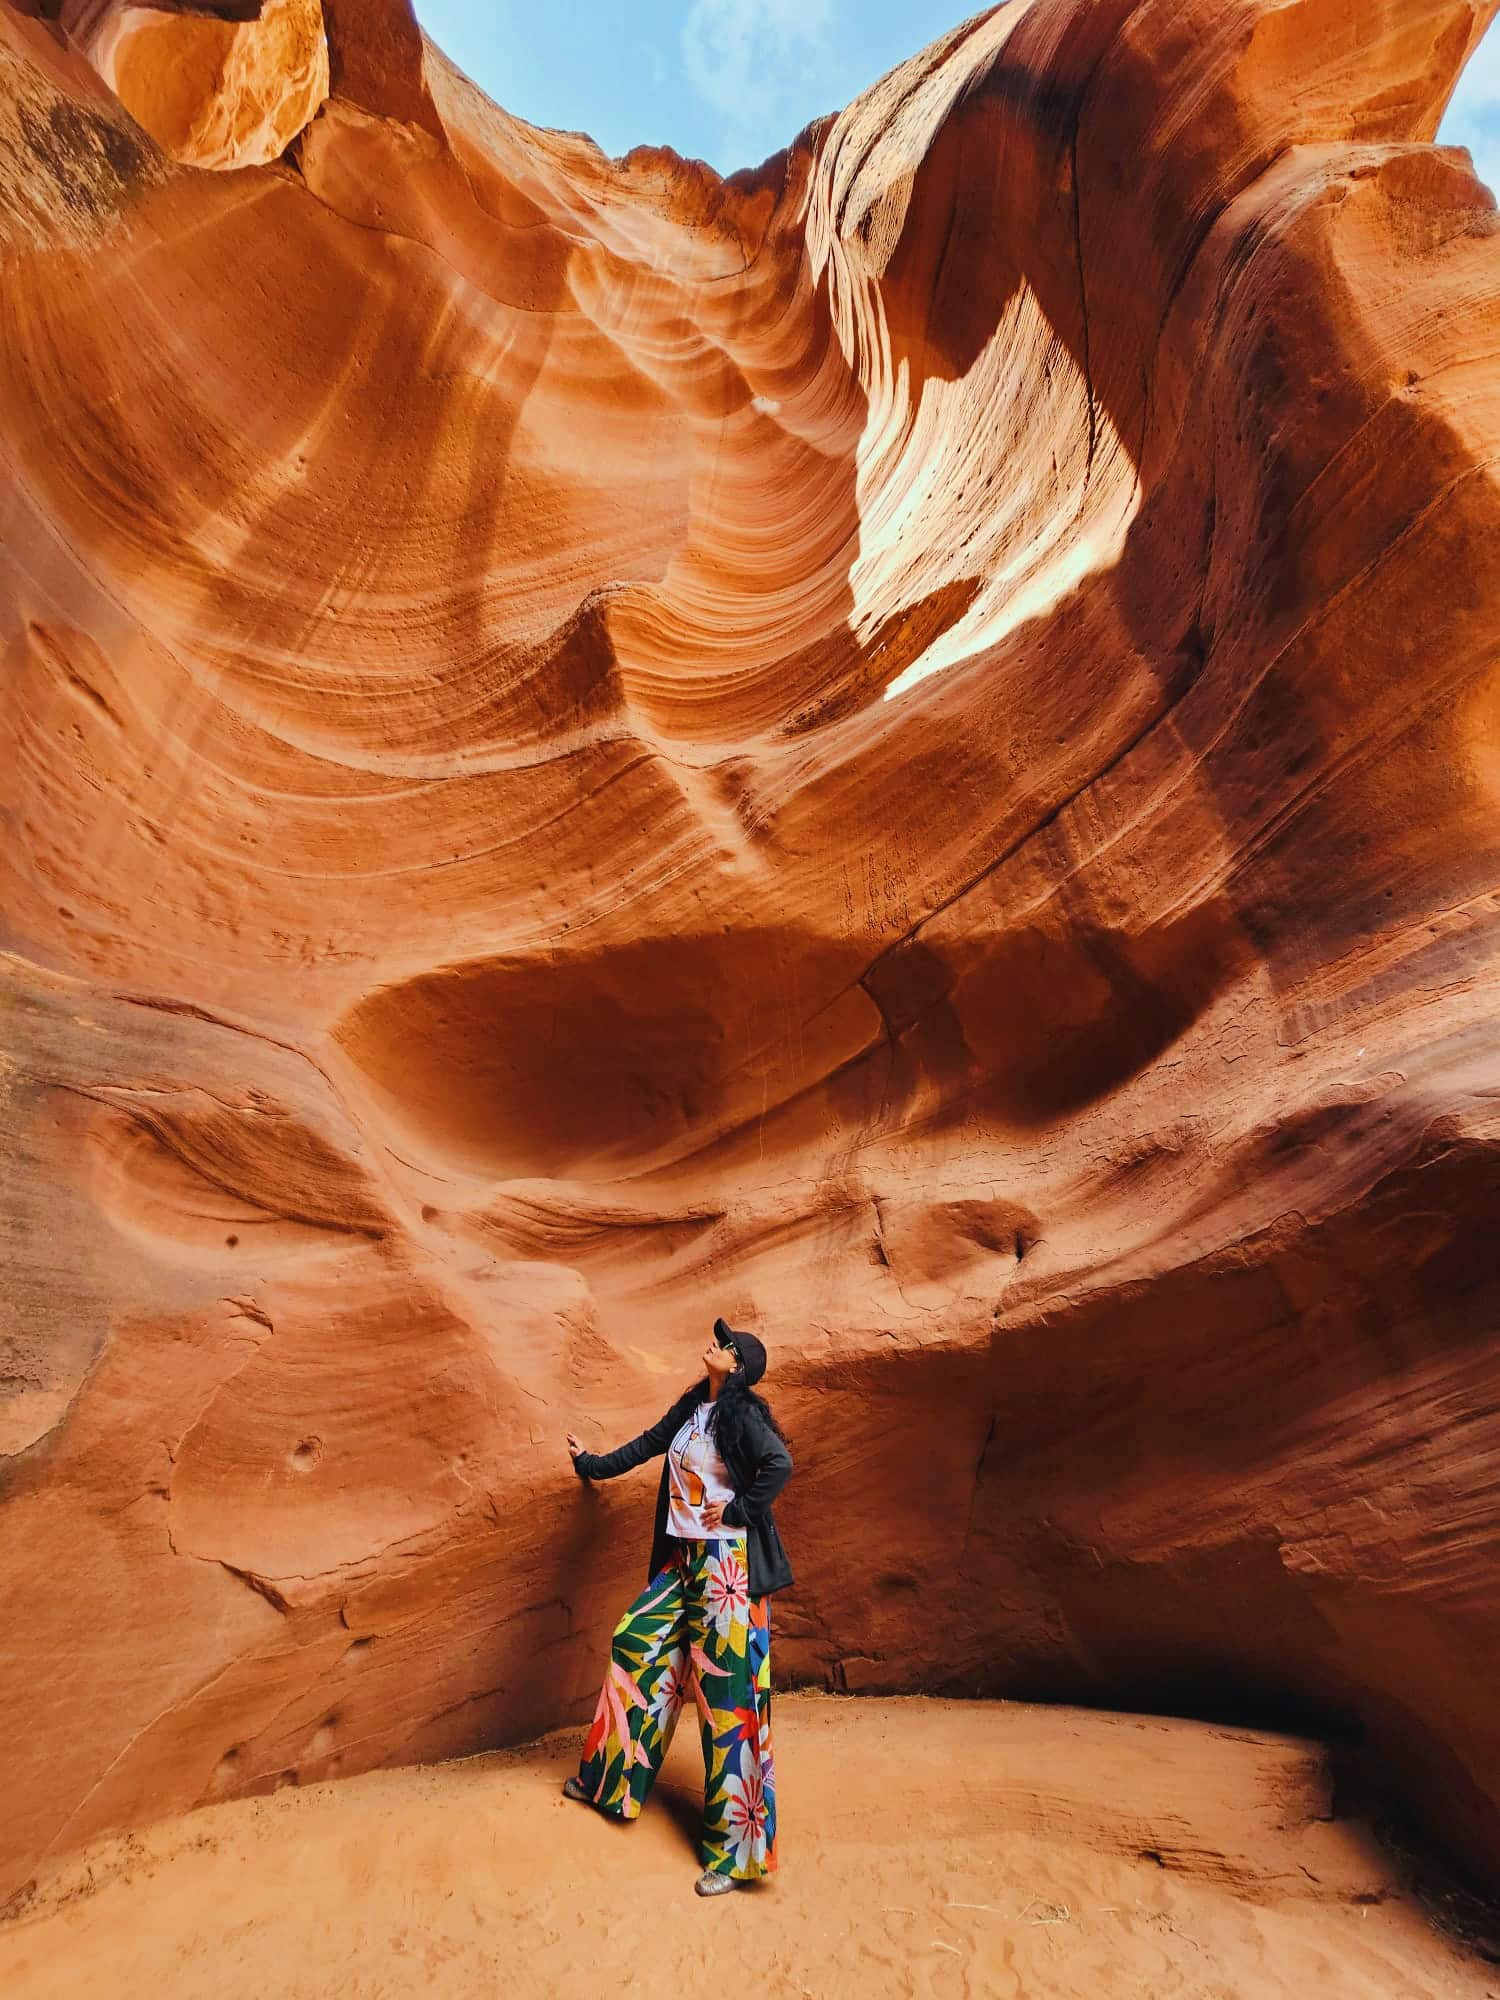 Gayatri Devgan, based in Santa Clara, California, traveled to Antelope Canyon in Page, Arizona, to hike and spend time with family.